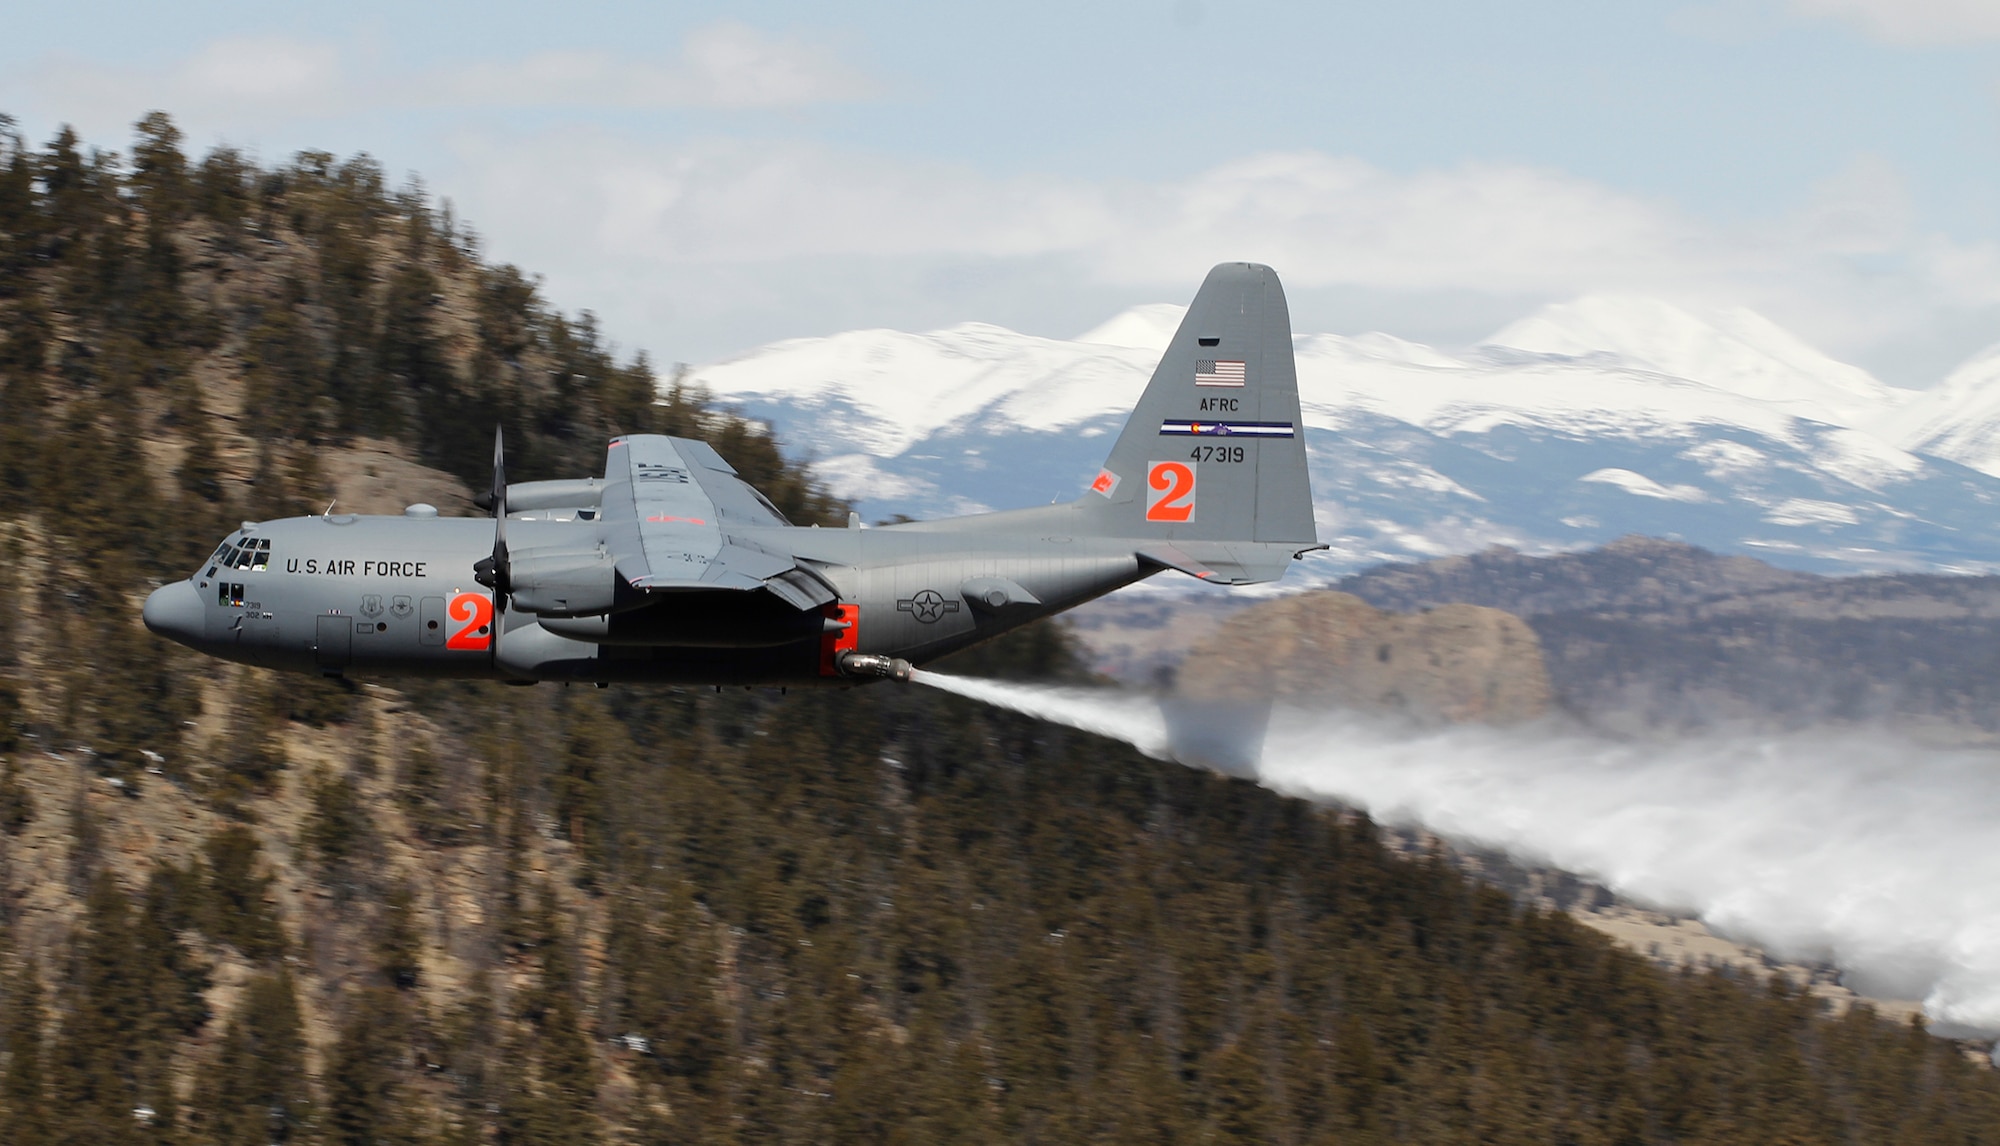 A Modular Airborne Fire Fighting System-equipped C-130 from the 302nd Airlift Wing drops a load of water April 22 near Fairplay, Colo. The Air Force Reserve Command’s 302nd AW held its annual MAFFS certification and re-certification for C-130 aircrews April 19-23. When it is determined MAFFS is needed, the National Interagency Fire Center through U.S. Northern Command requests the DOD's U.S. Air Force resources. These trained military personnel along with the MAFFS equipment are activated to supplement the civilian air tanker program during periods of high wildfire activity throughout the nation. In 2012 the 302nd AW MAFFS-equipped C-130s, aircrew and personnel supported fire suppression operations in 10 states, including drops on the Waldo Canyon fire near Colorado Springs. 2013 marks the 20th year the MAFFS mission has been flown by the Airmen and C-130s of the 302nd AW. (U.S. Air Force photo/Staff Sgt. Nathan Federico)